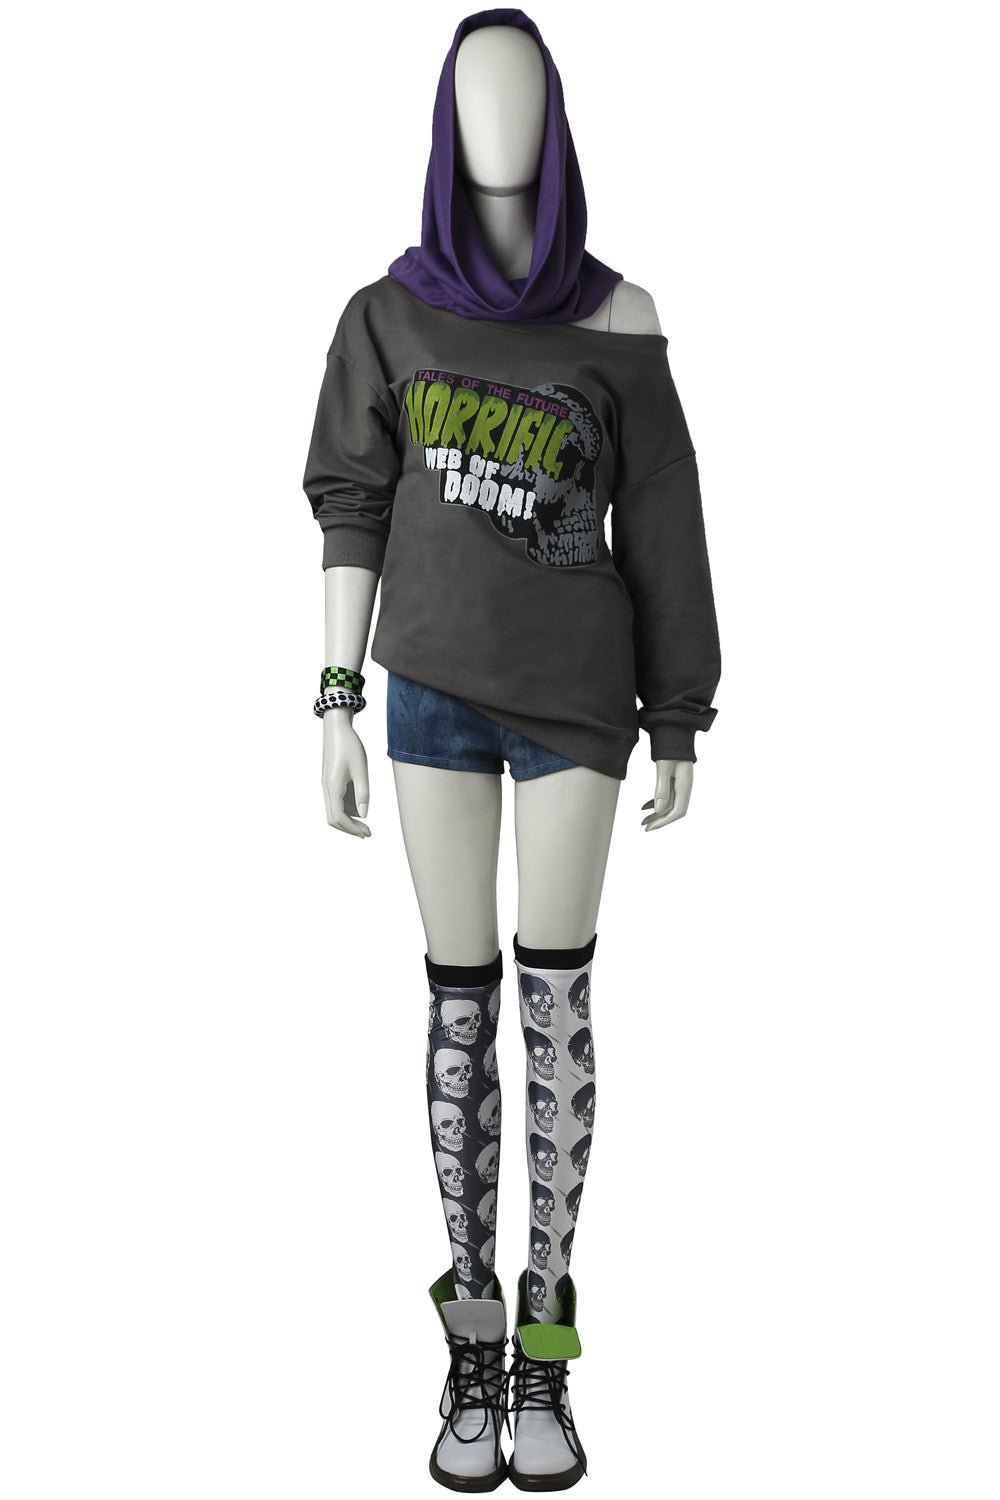 Watch Dogs 2 DedSec Sitara Dhawan Cosplay Costumes outfit Tops